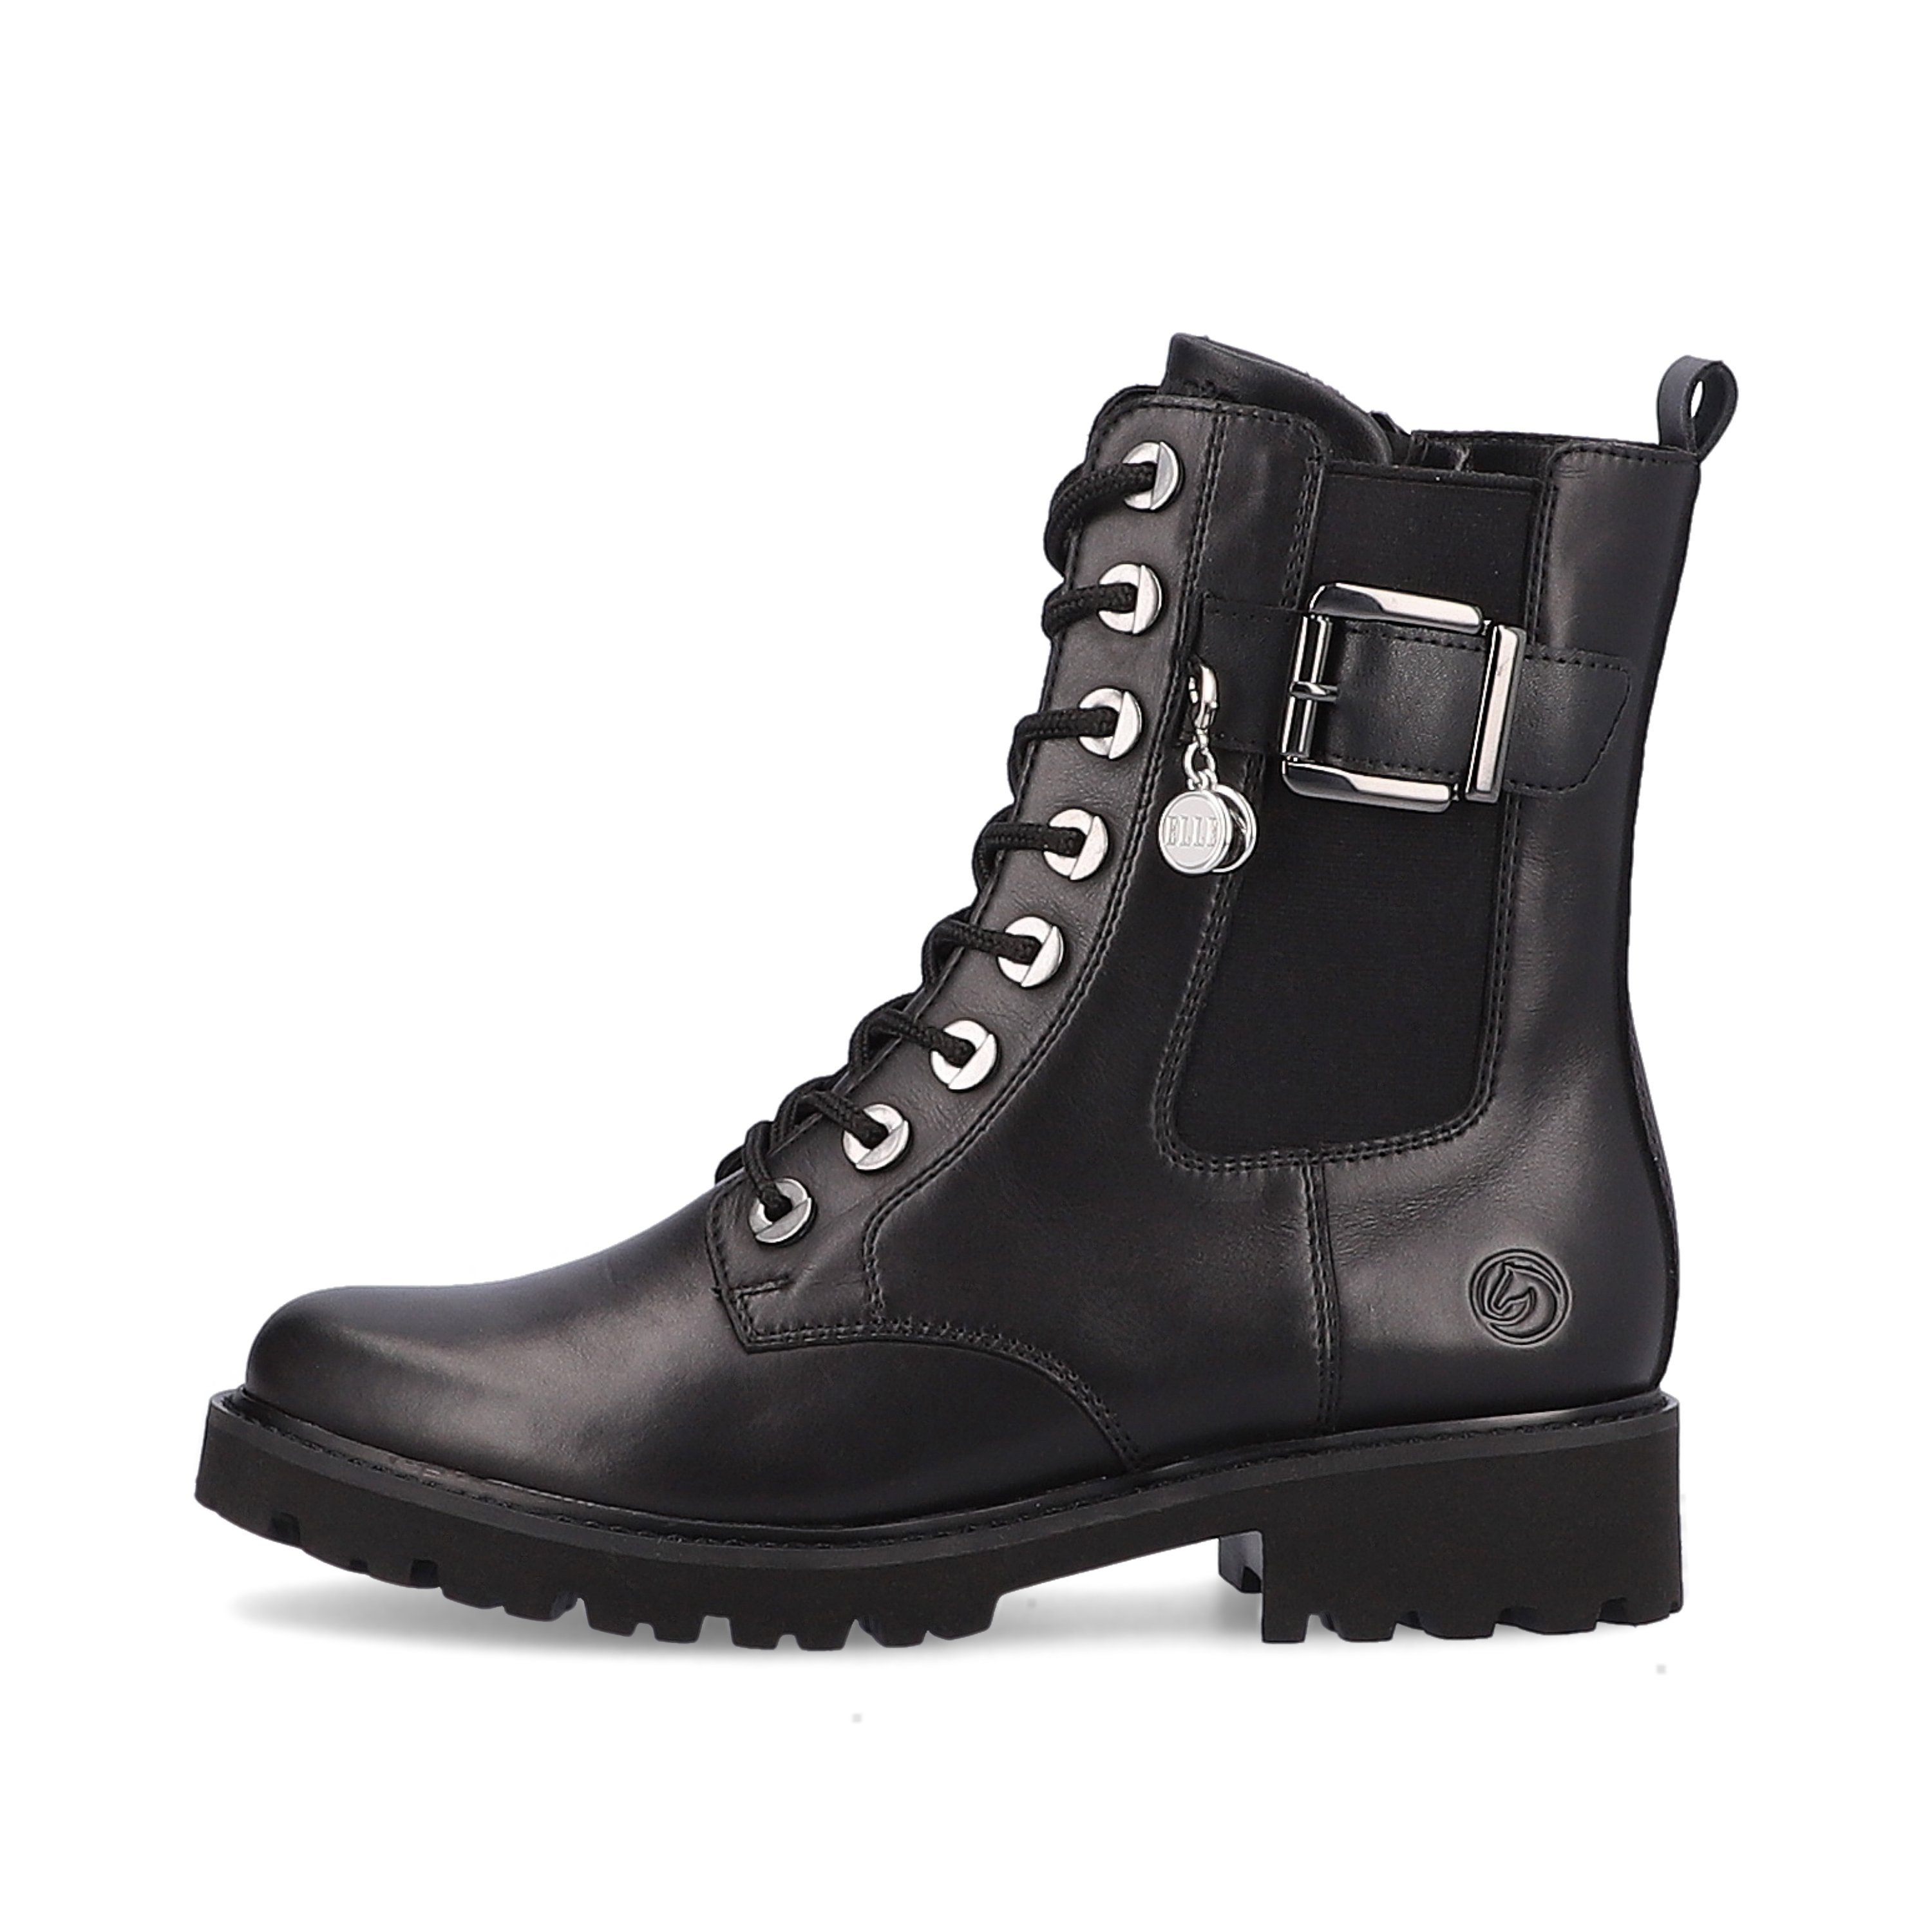 Night black remonte women´s biker boots D8668-00 with especially light sole. The outside of the shoe